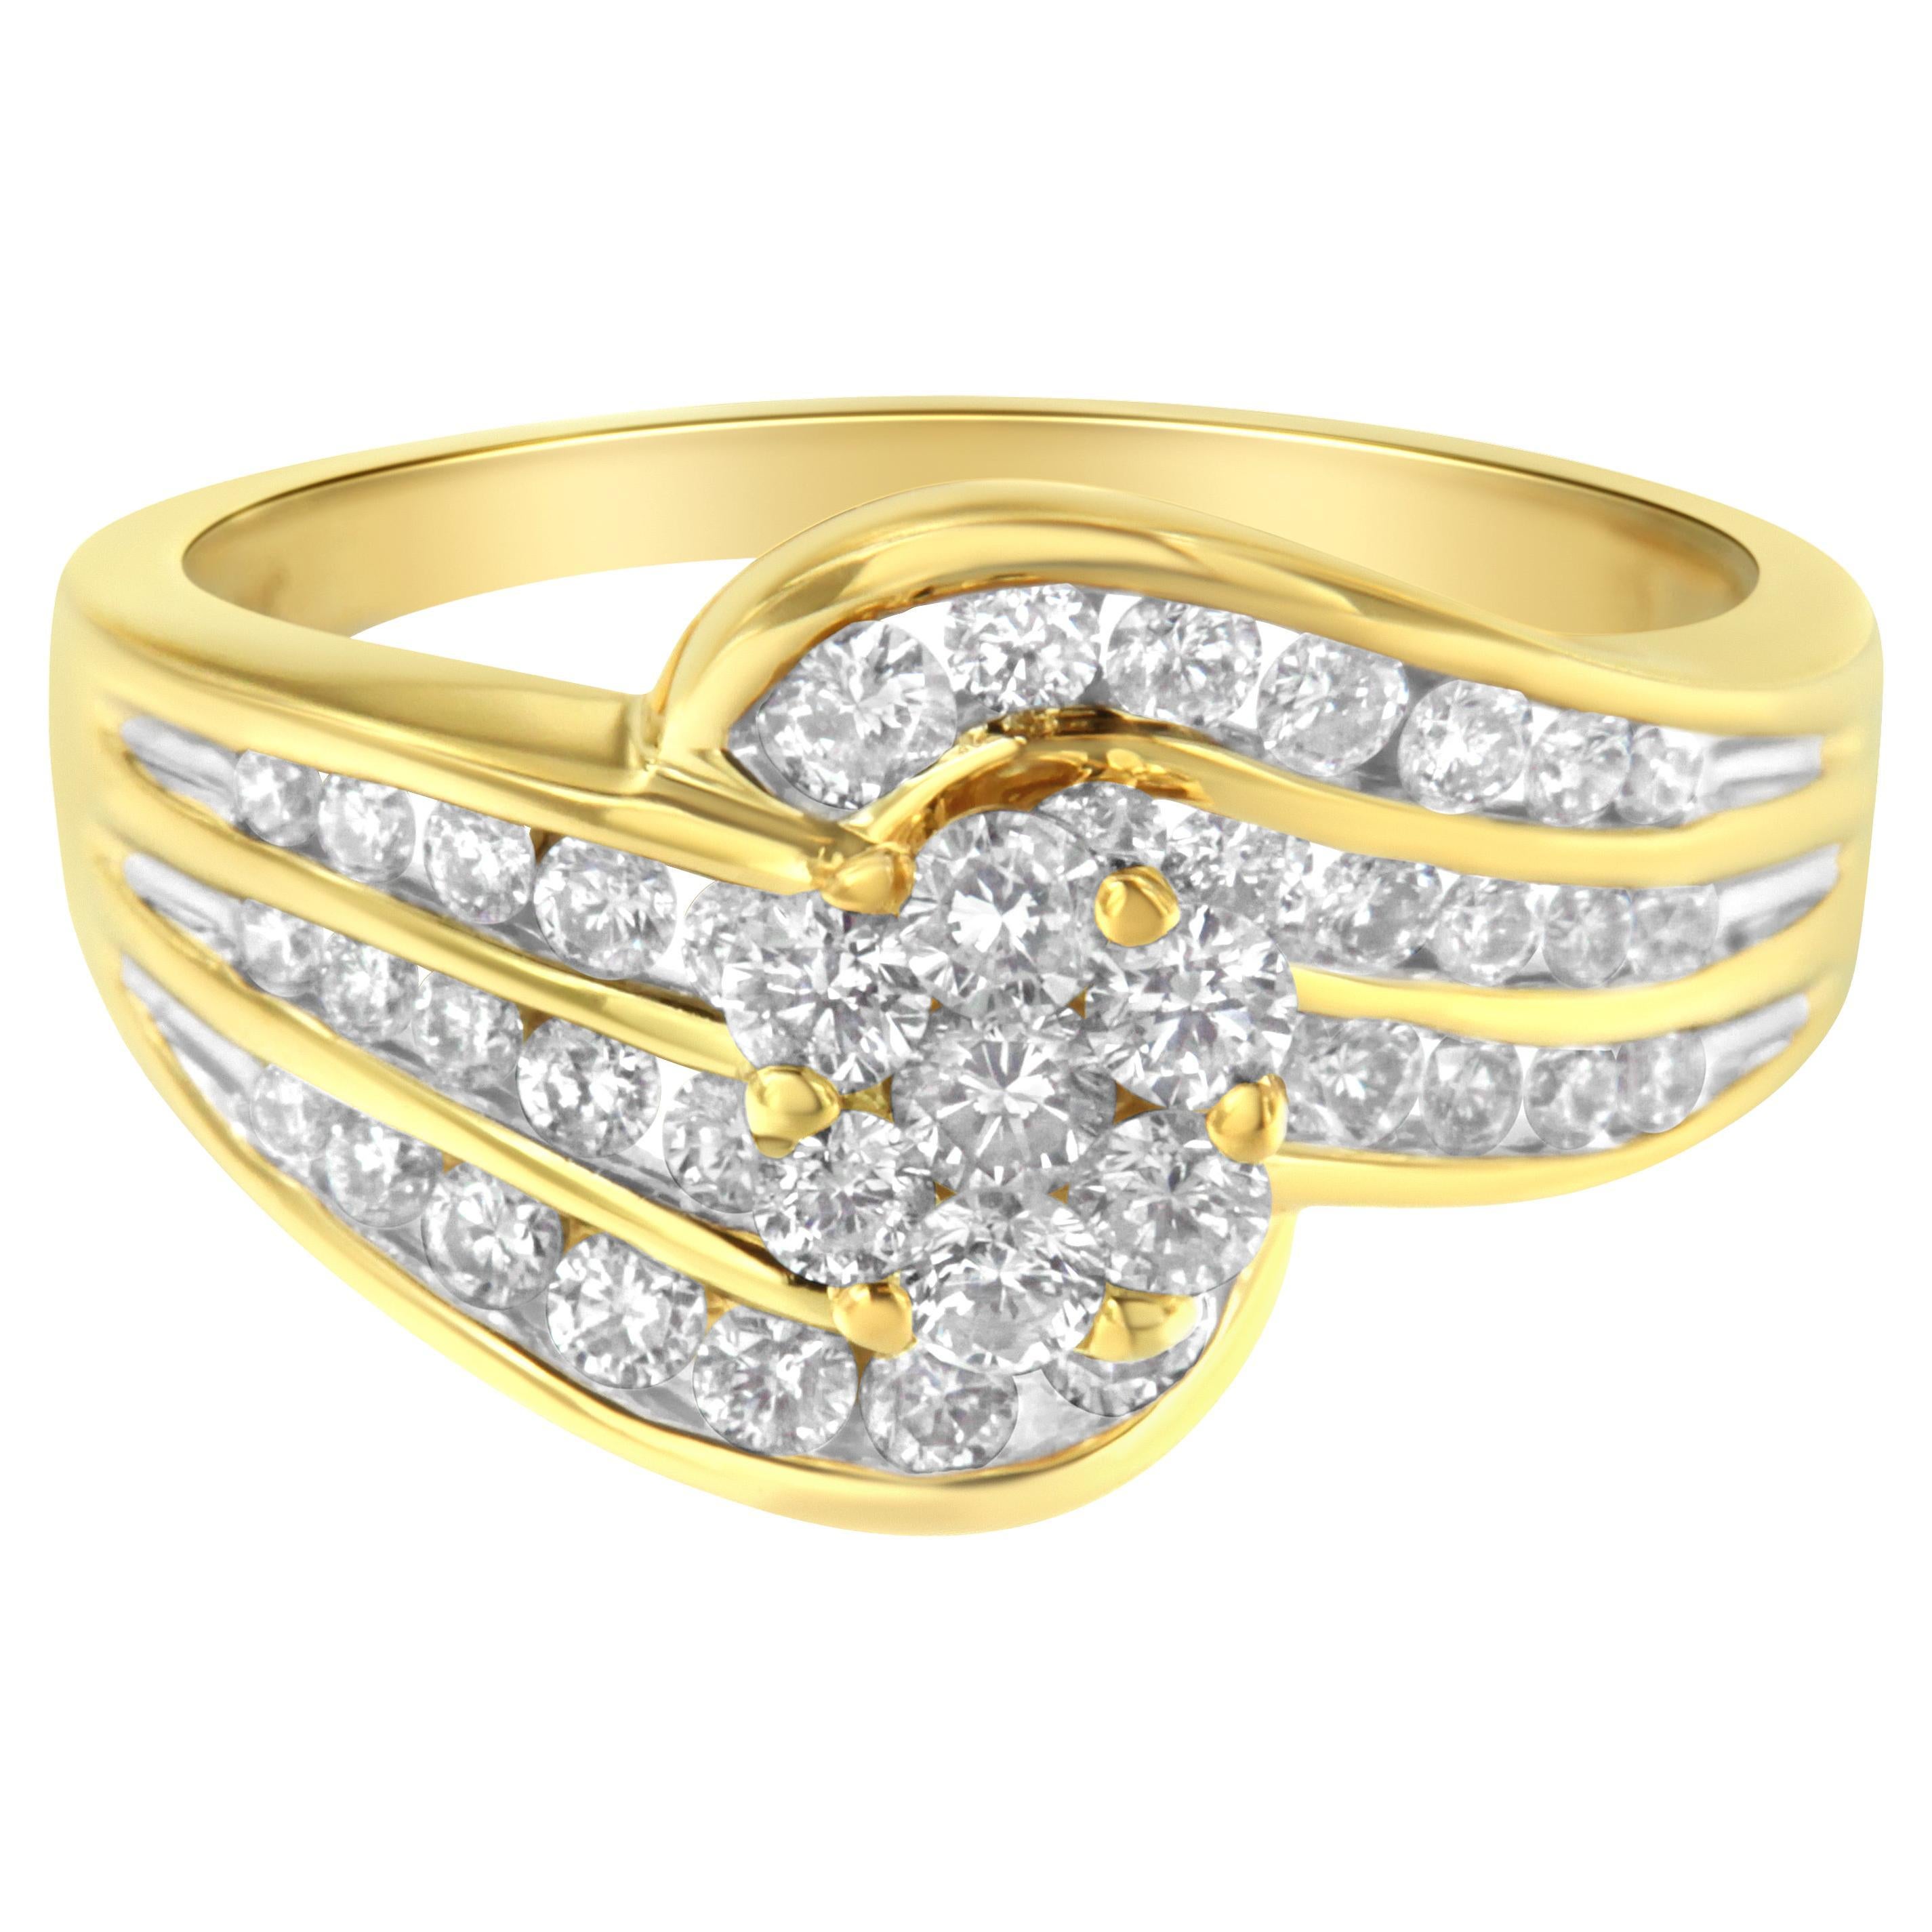 For Sale:  14K Yellow Gold 1 1/2 Carat Diamond Cocktail Bypass Ring